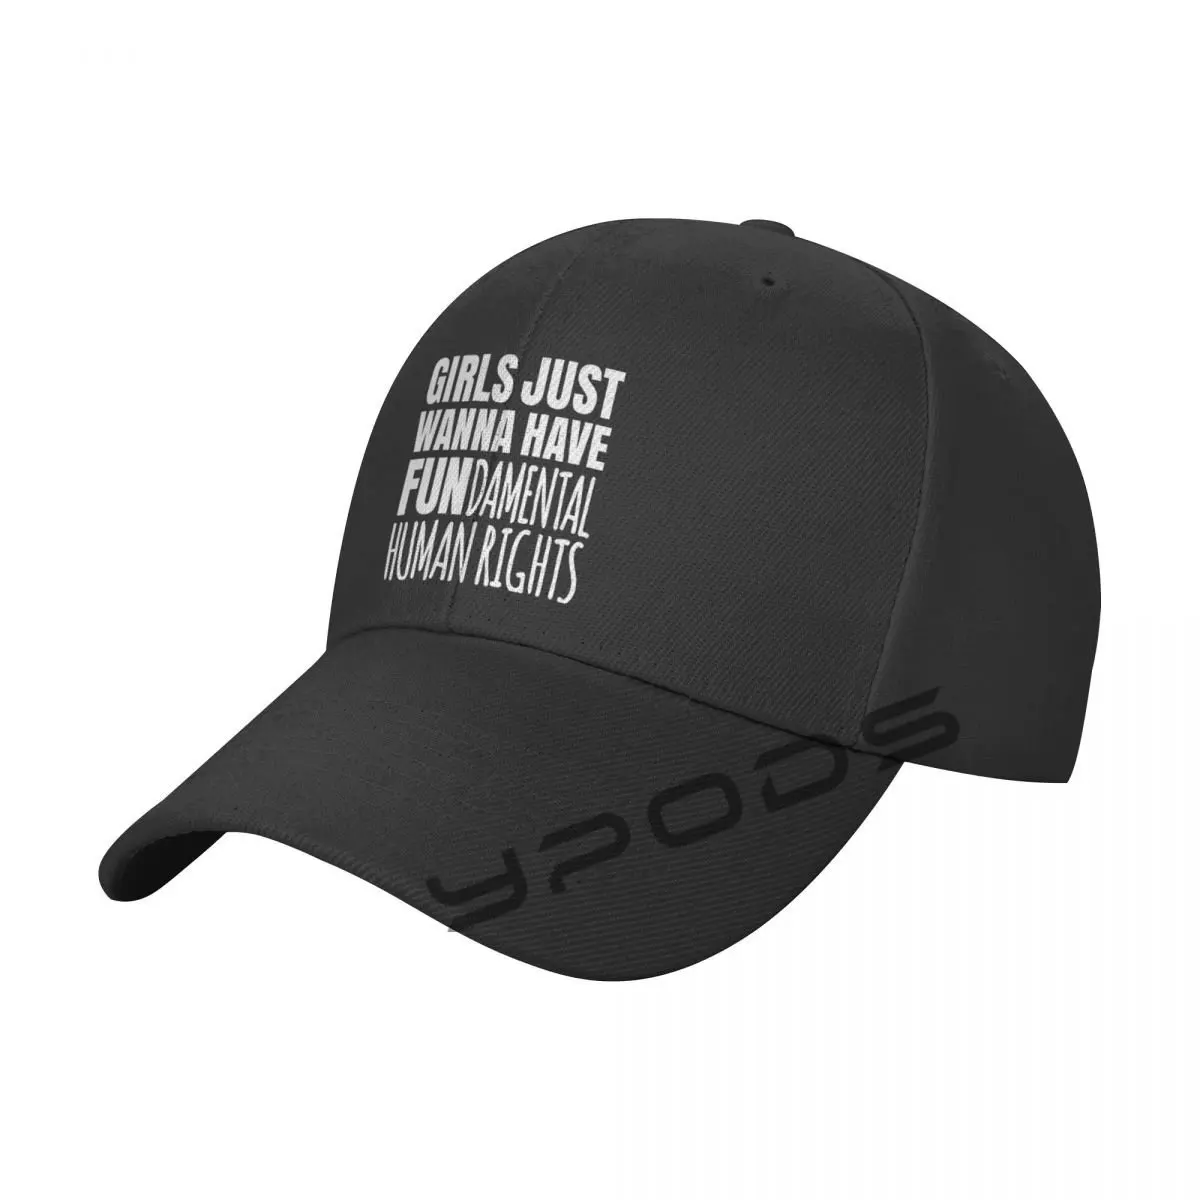 

Girls Just Wanna Have Fundamental Human Rights Baseball Cap for Men and Women Fashion Hat Soft Top Caps Casual Retro Hats Unisex